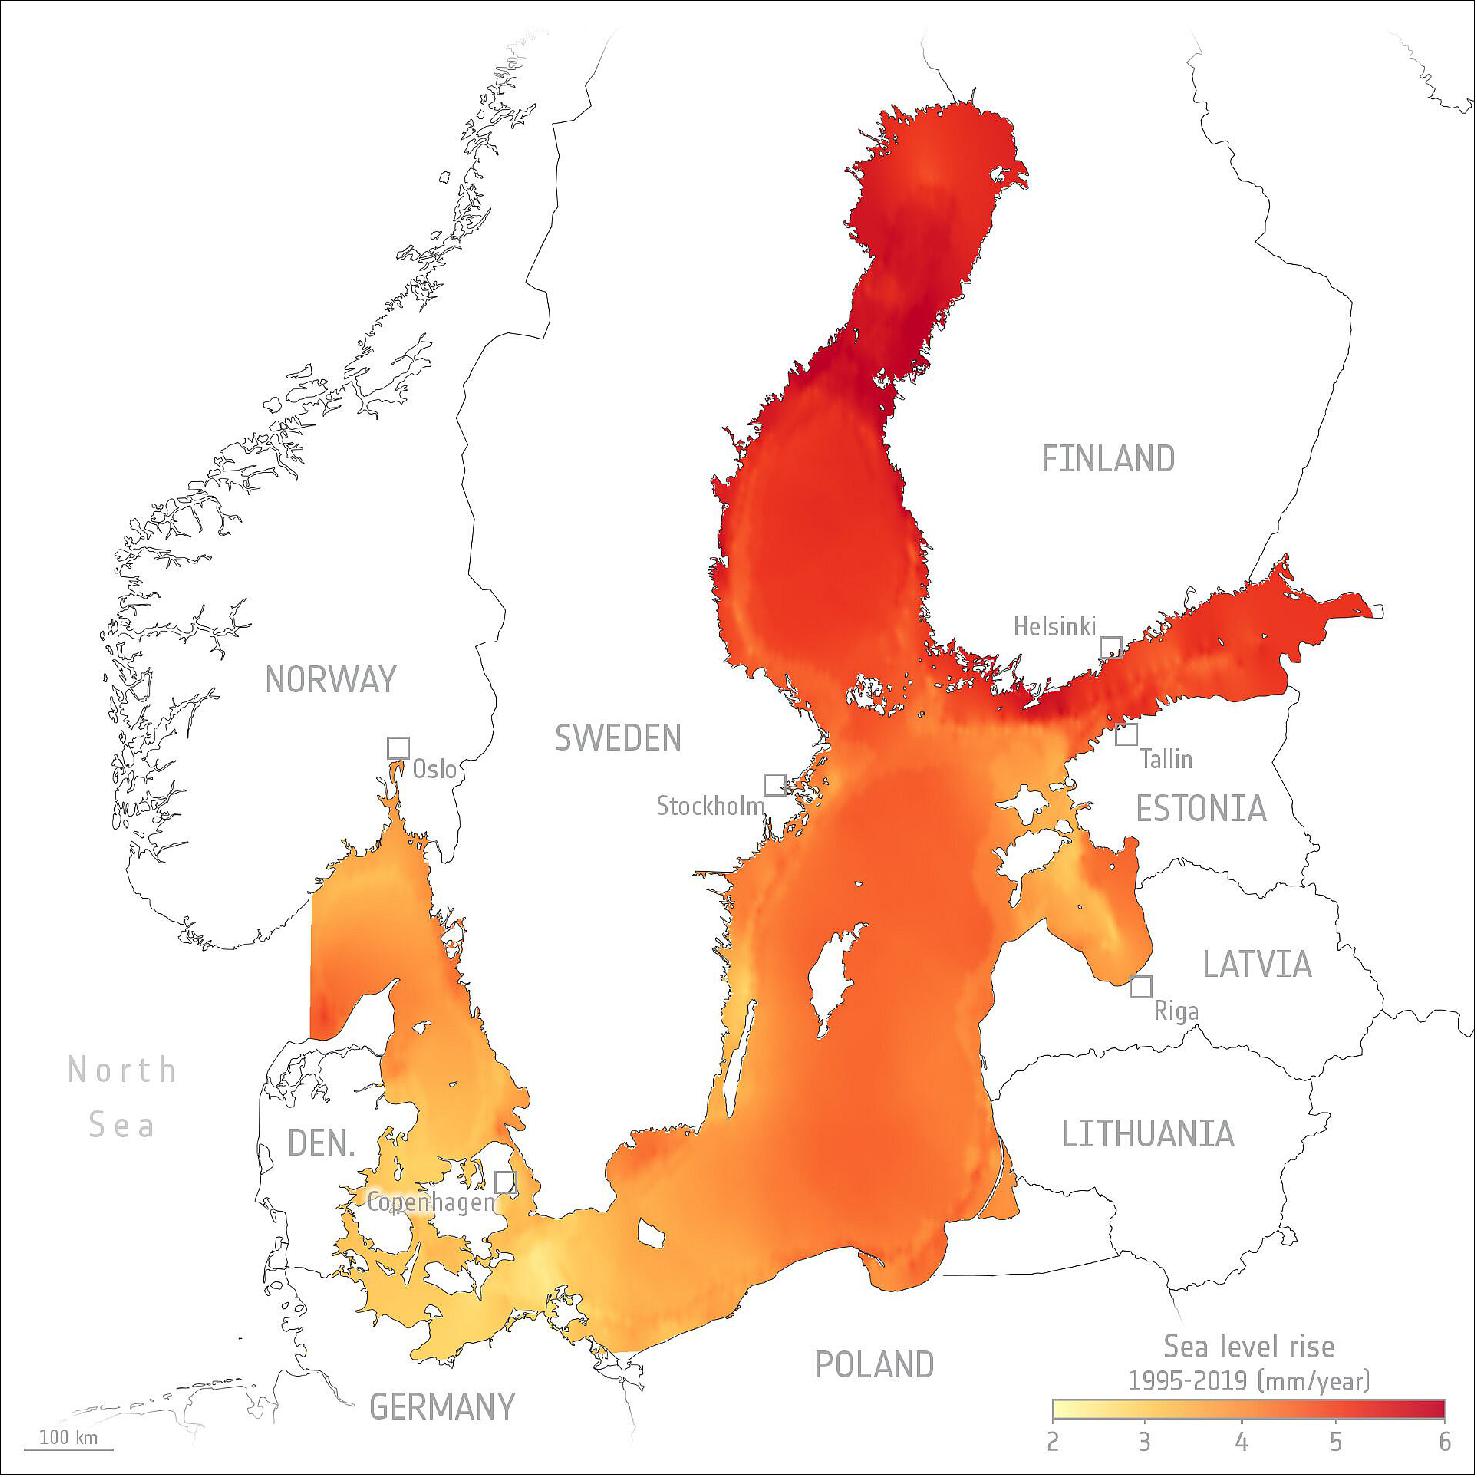 Figure 27: The map shows mean sea-level rise in the North and Baltic Sea (millimeters per year), calculated using satellite altimetry data between 1995 and 2019 (image credit: TUM/ESA)